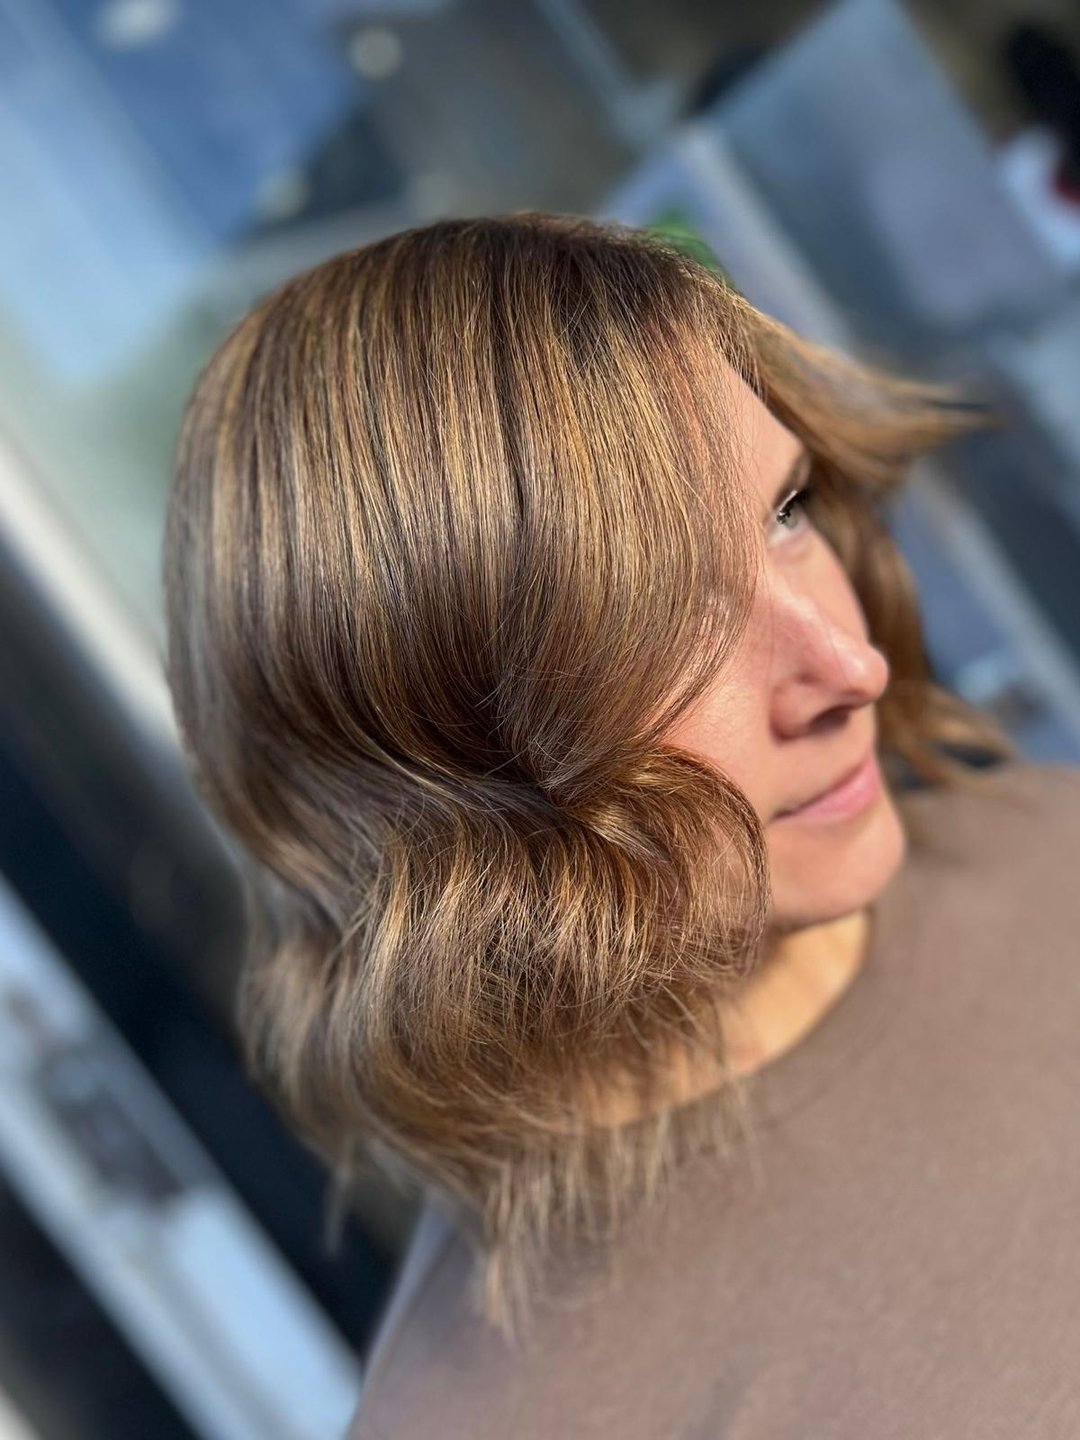 iding the waves of elegance with shoulder-length perfection! 🌊 

Our client's light brown waves are the epitome of effortless chic. Ready to embrace the natural beauty of cascading waves? Click the link in our bio and let's make your wavy dreams a r